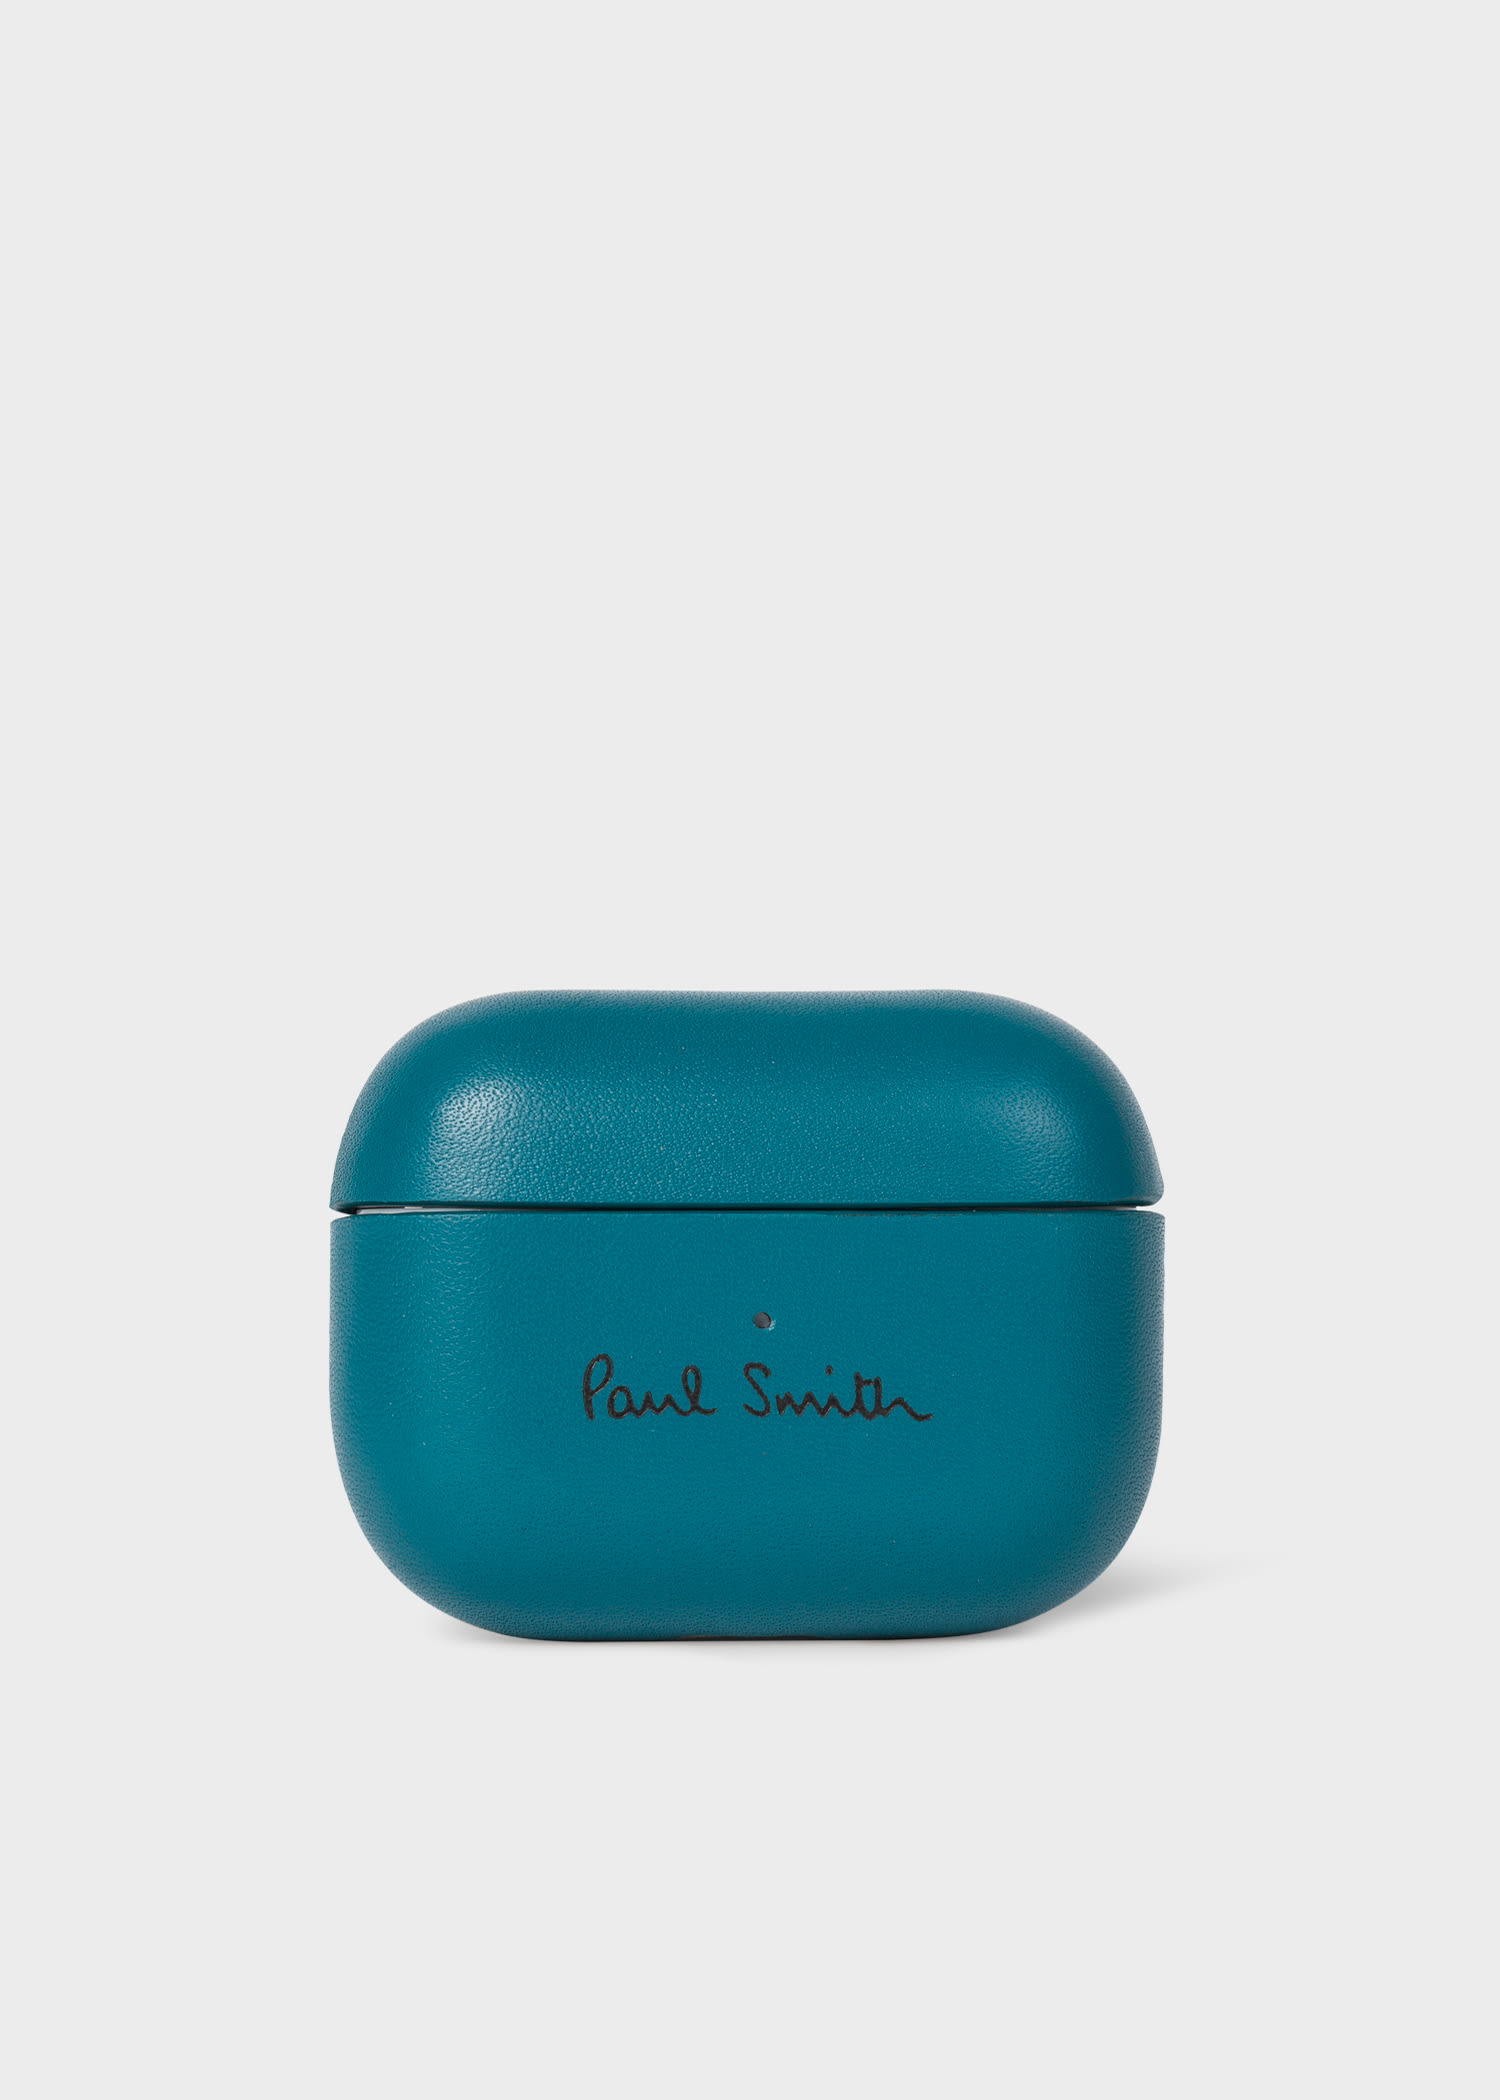 Paul Smith X Native Union - Teal Leather AirPod Pro Case